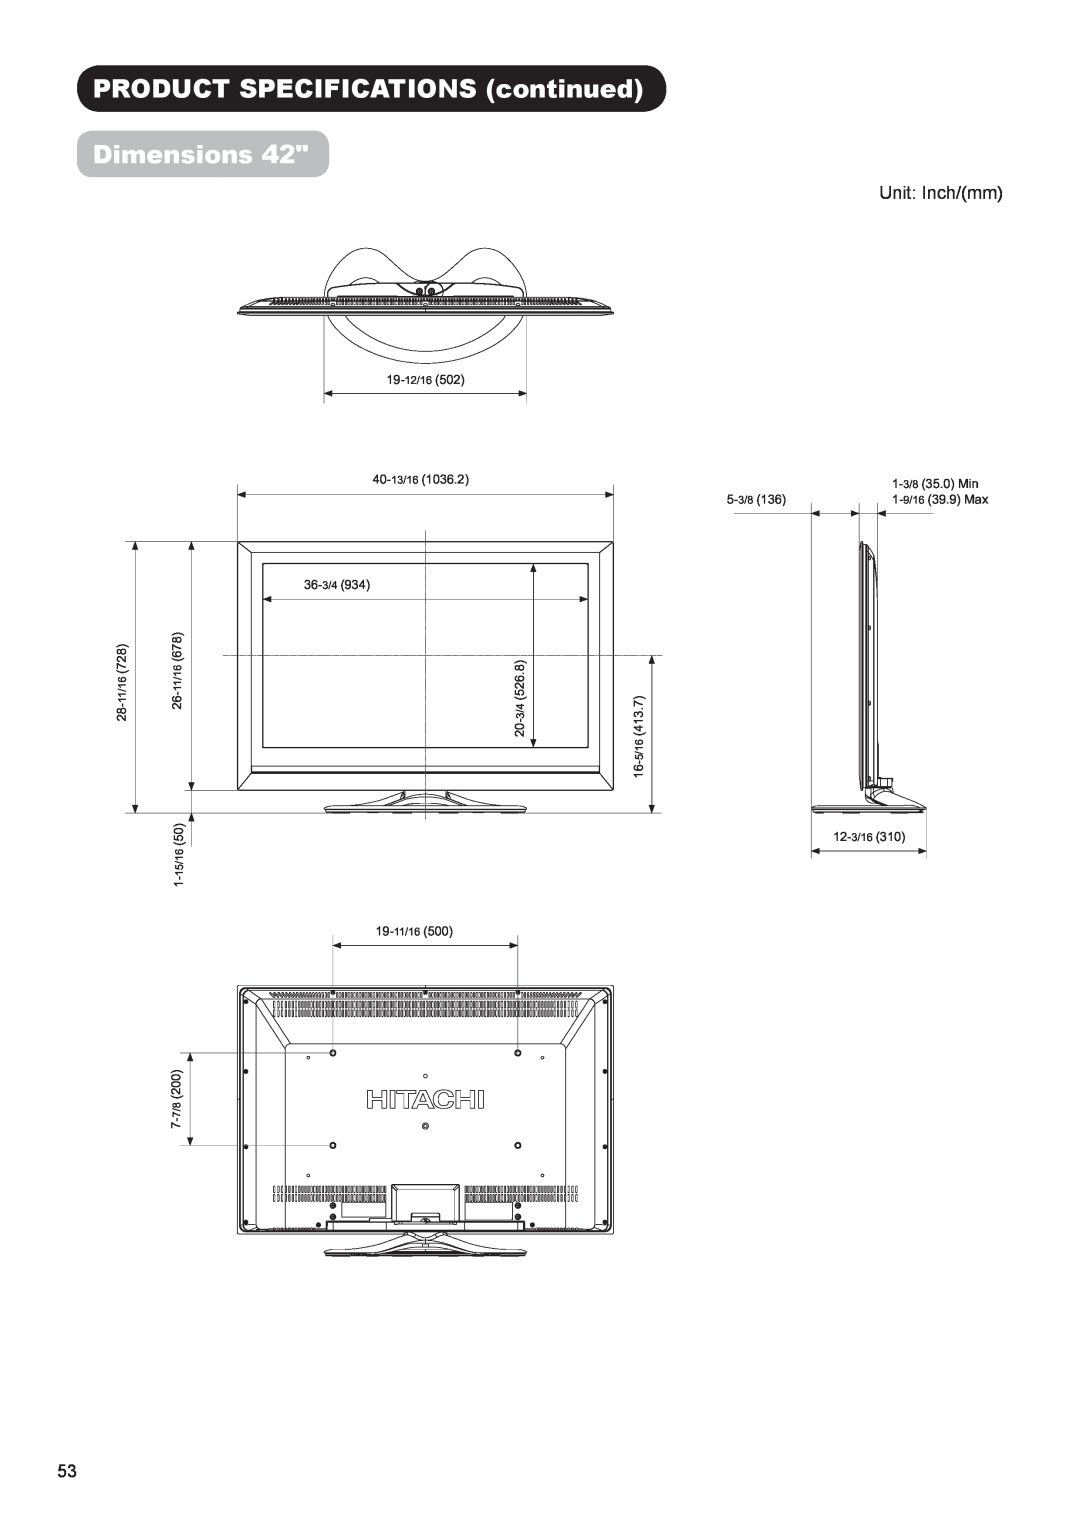 Hitachi UT47X902, UT37X902, UT42X902 manual PRODUCT SPECIFICATIONS continued Dimensions, Unit Inch/mm 